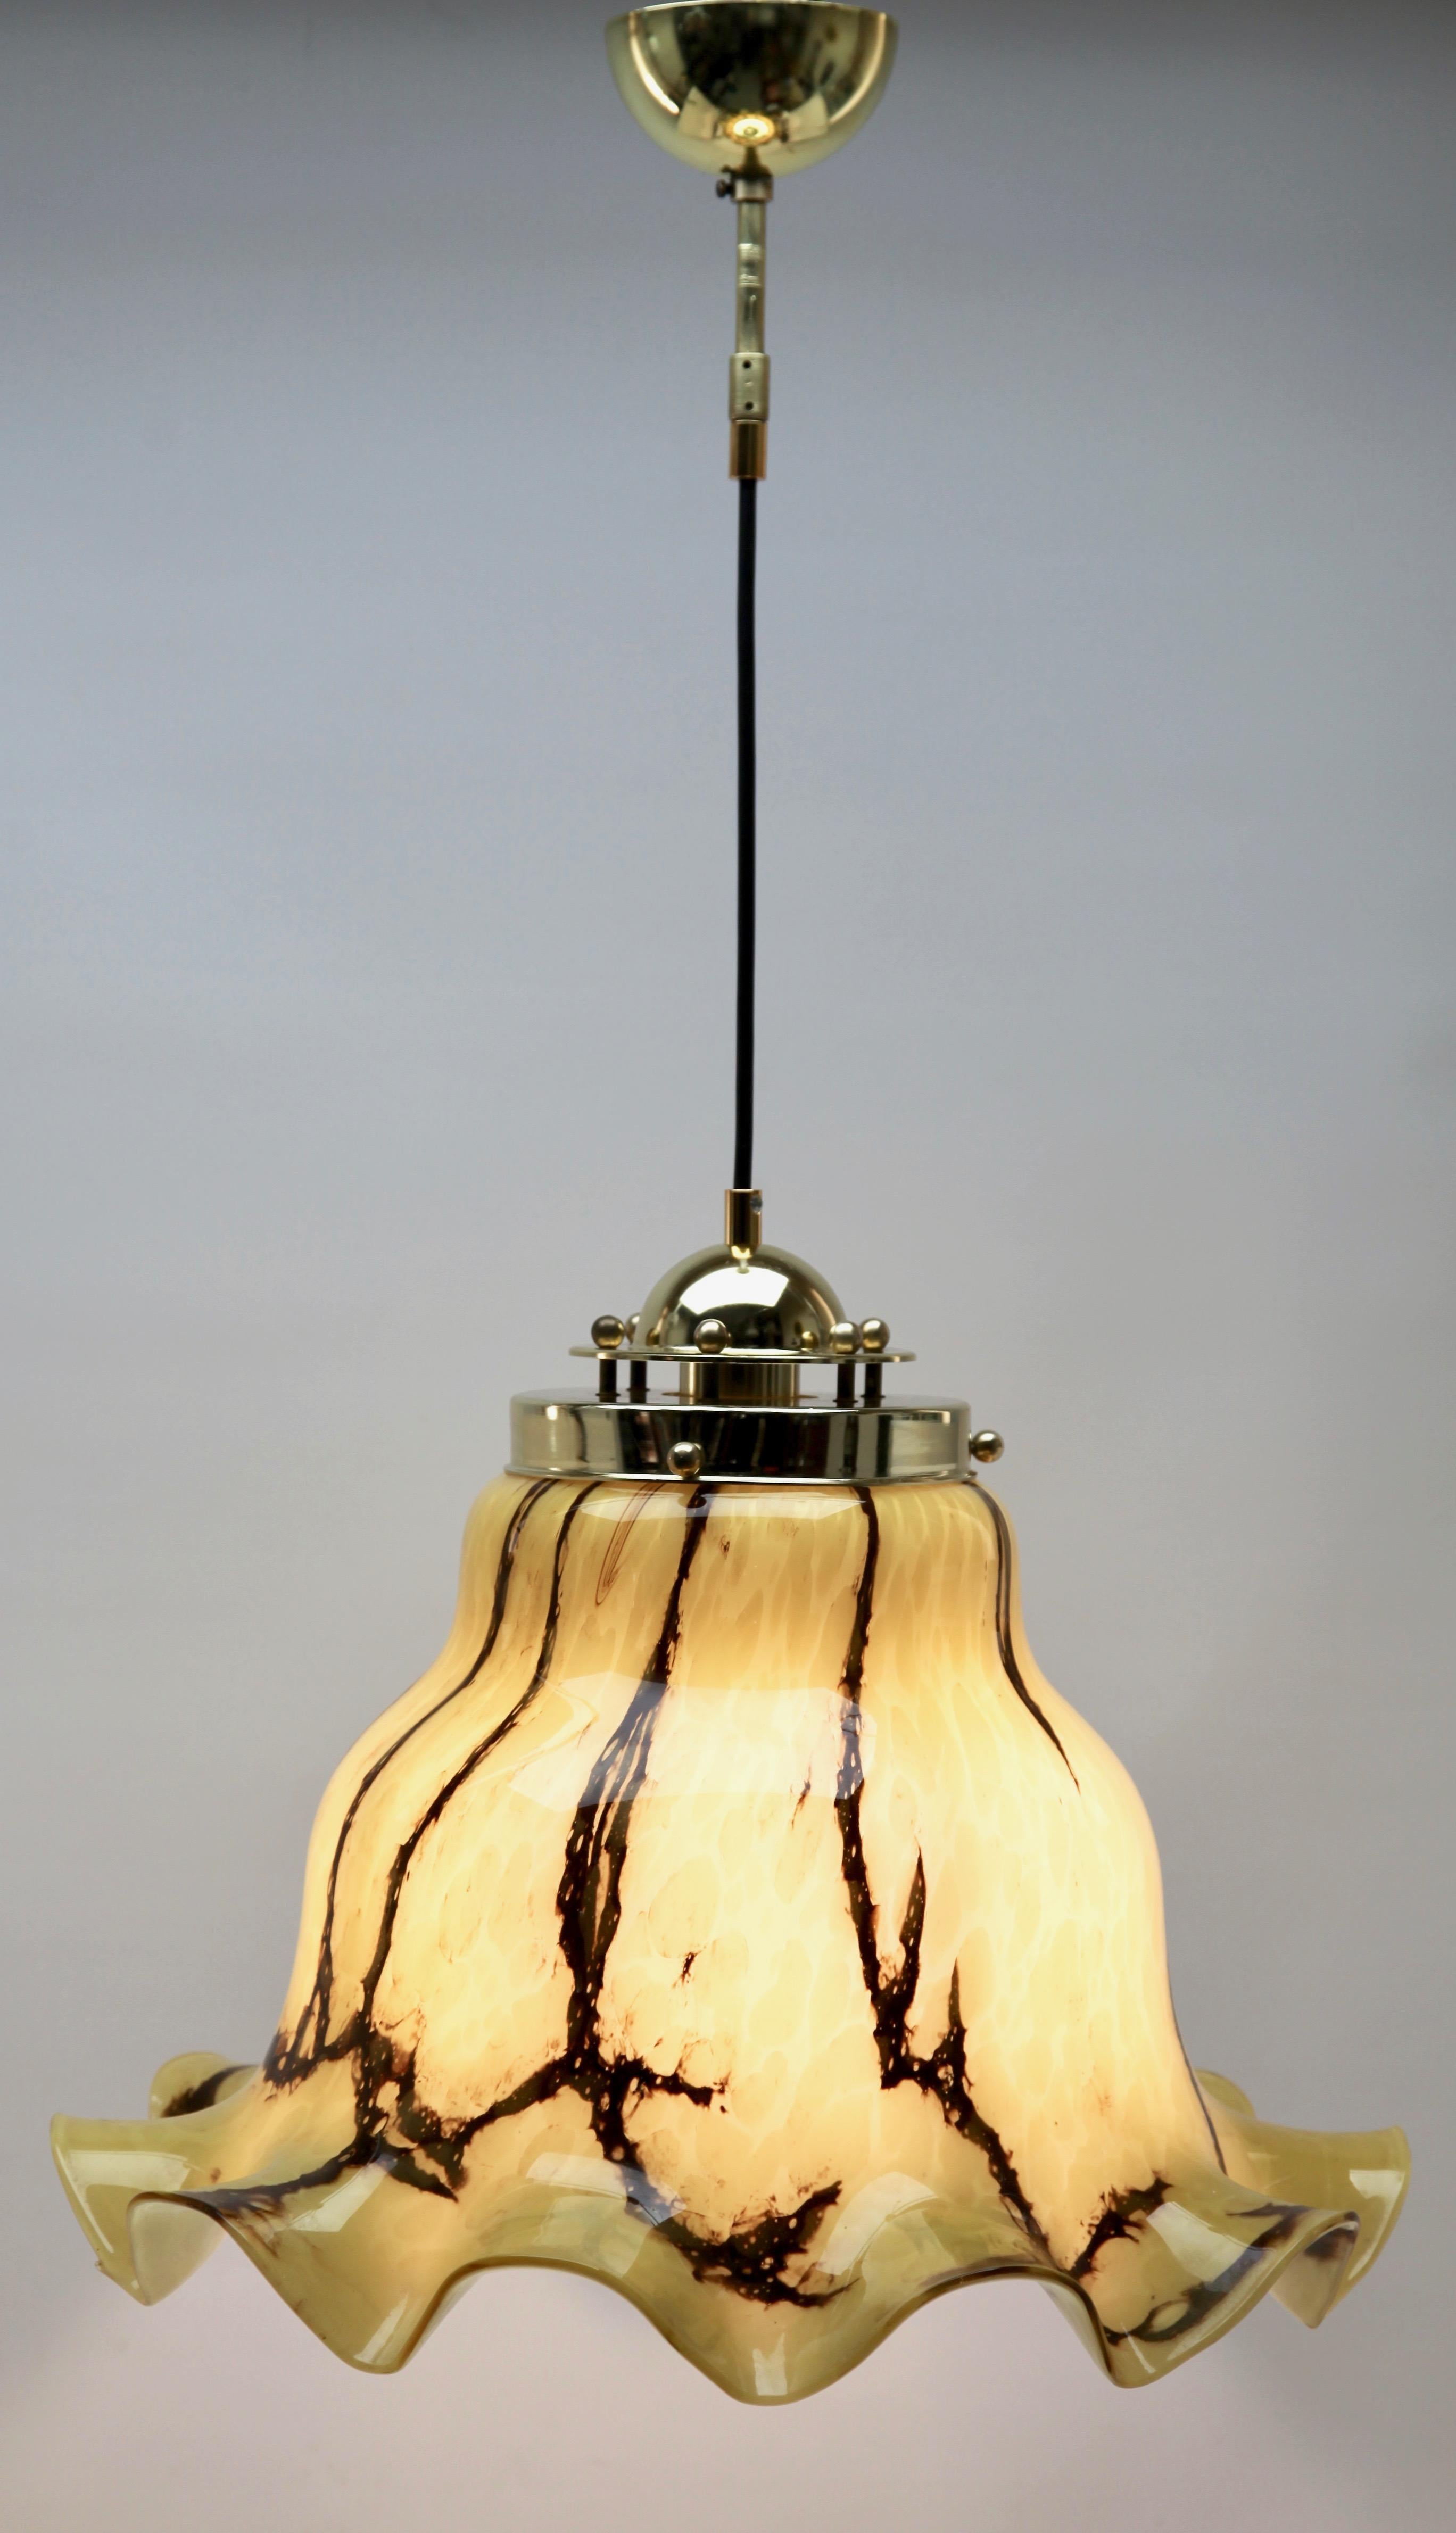 Vintage pendant light by Peill & Putzler, Germany. This central pendant light is crafted from heavy hand-blown glass with dramatic swirling clouds of brown and cream creating a cloudy feel. 

Photography fails to capture the simple elegant